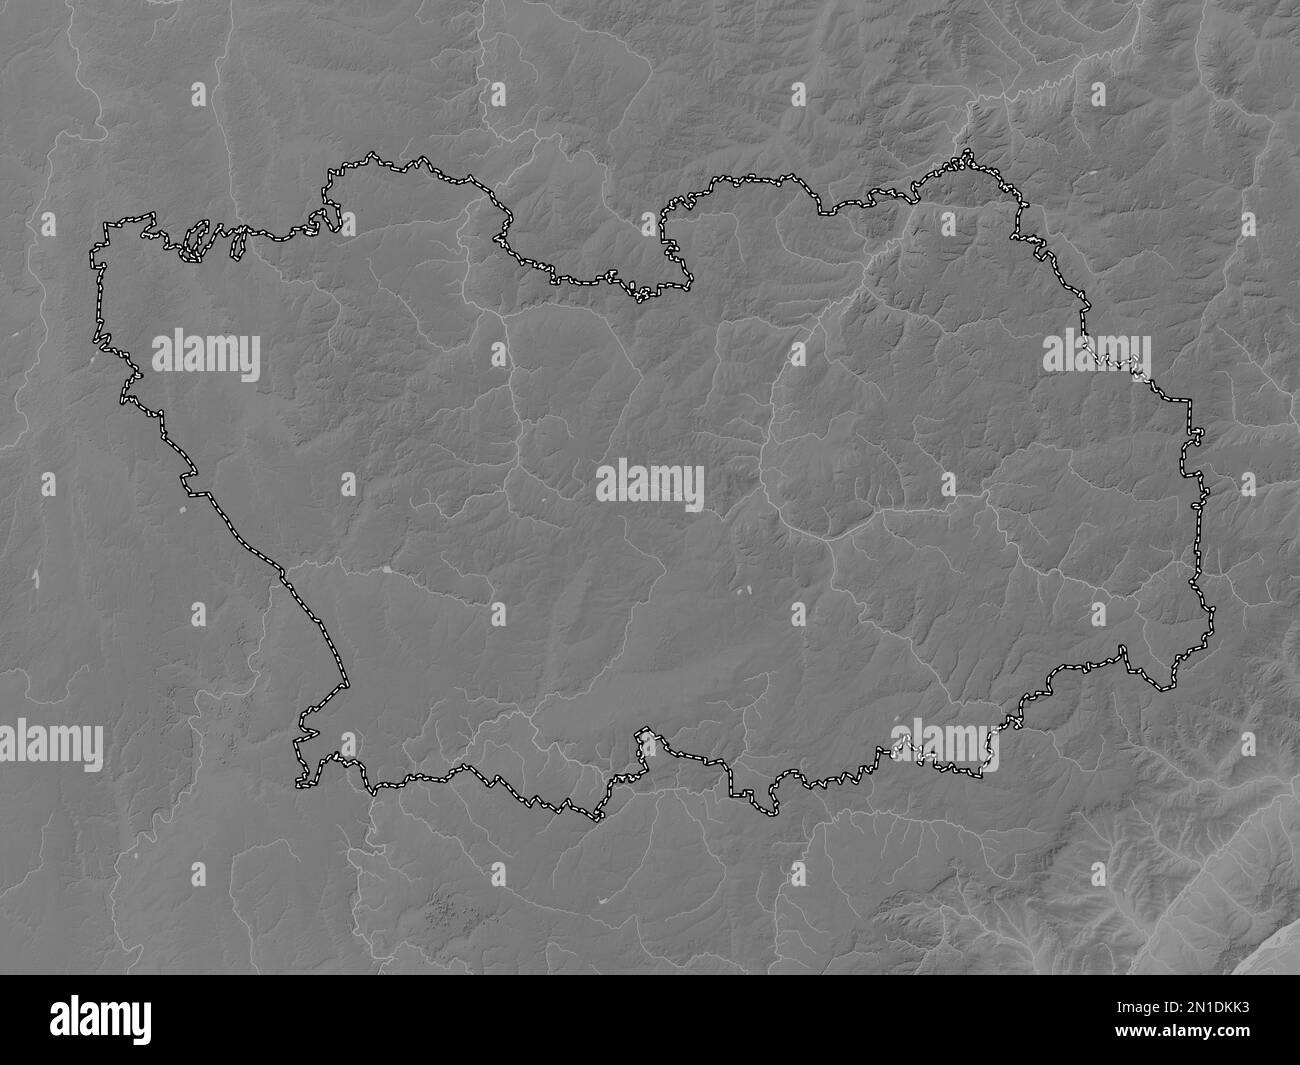 Penza, region of Russia. Grayscale elevation map with lakes and rivers Stock Photo